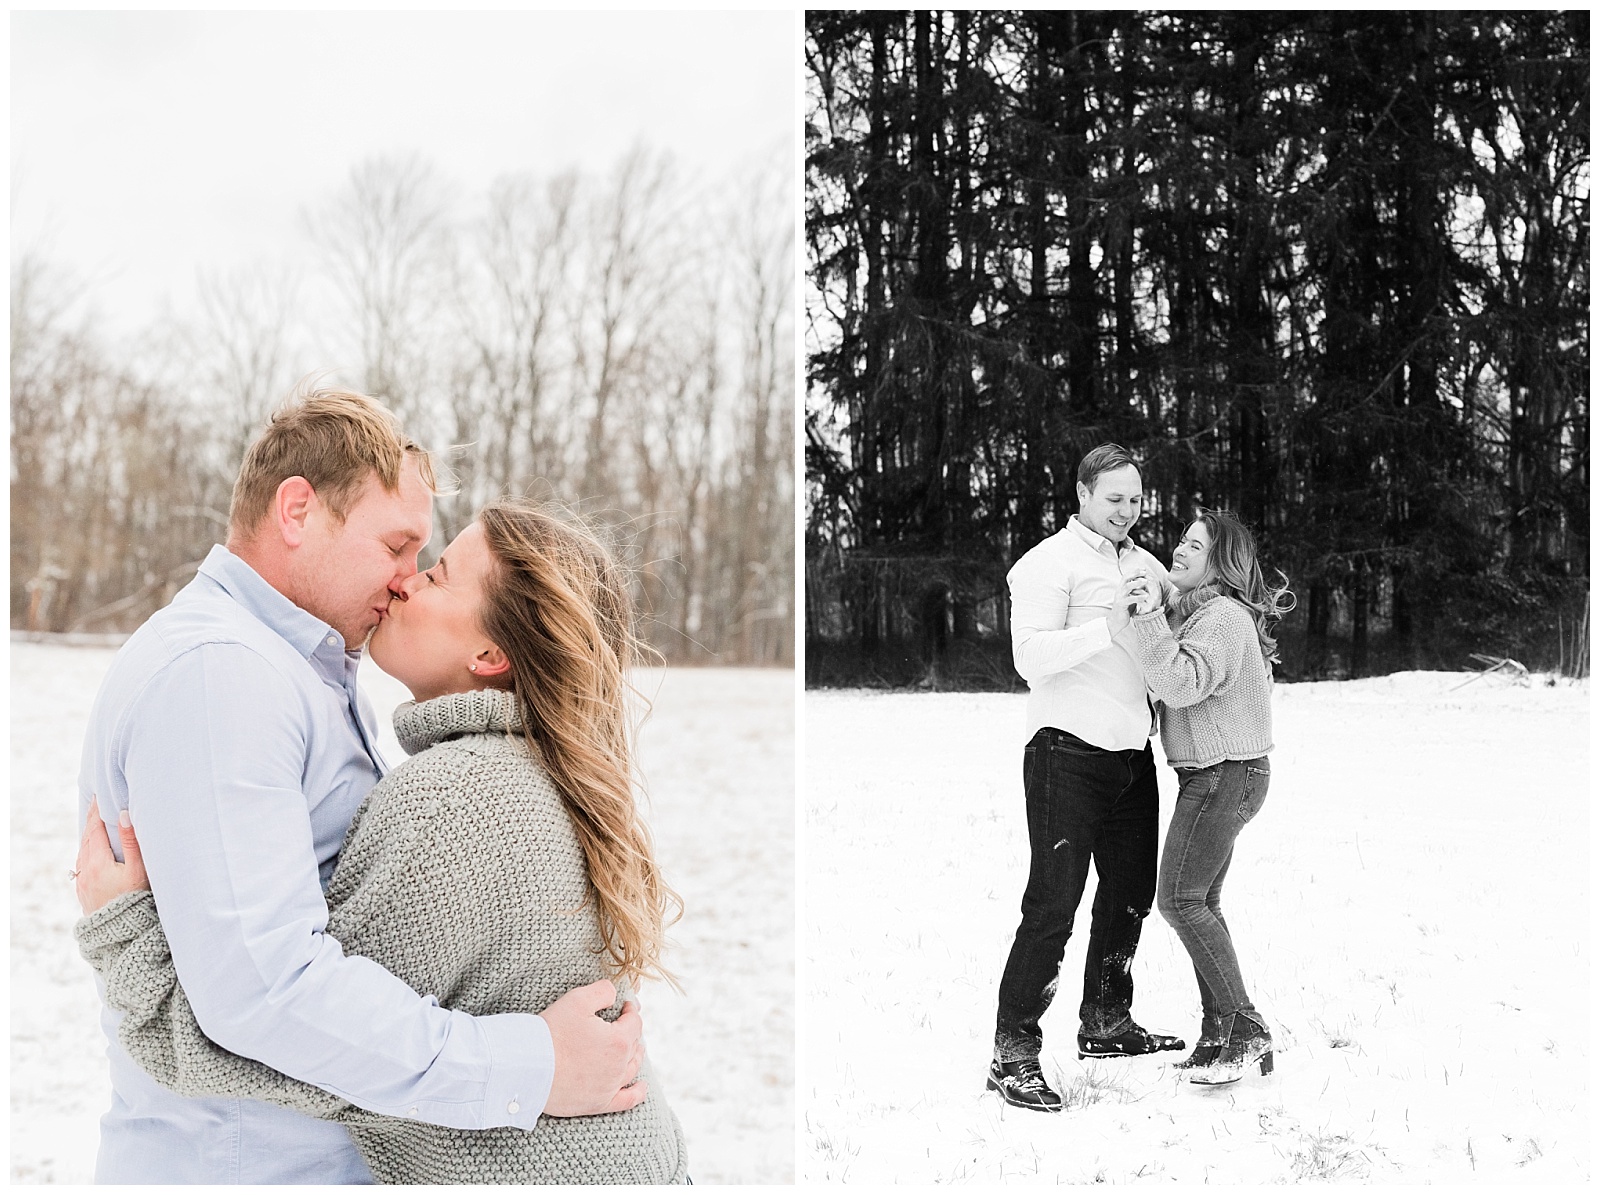 New Jersey Engagement Session, Snowy, Winter, Cozy, Session, Wedding Photographer, Cross Estate Gardens, Snow, Wintry,